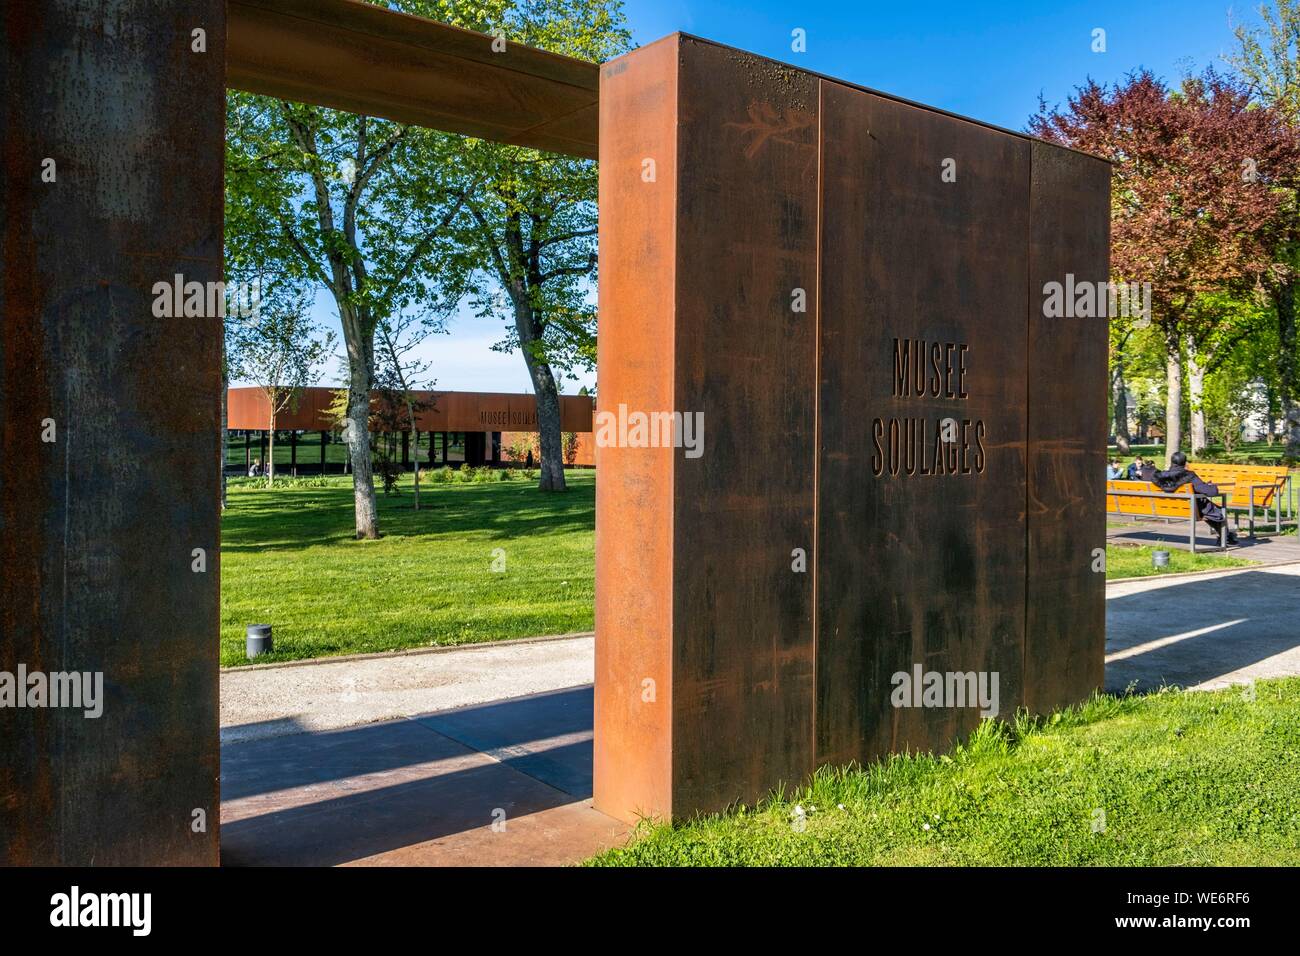 France, Aveyron, Rodez, the Soulages Museum, designed by the Catalan architects RCR associated with Passelac & Roques Stock Photo